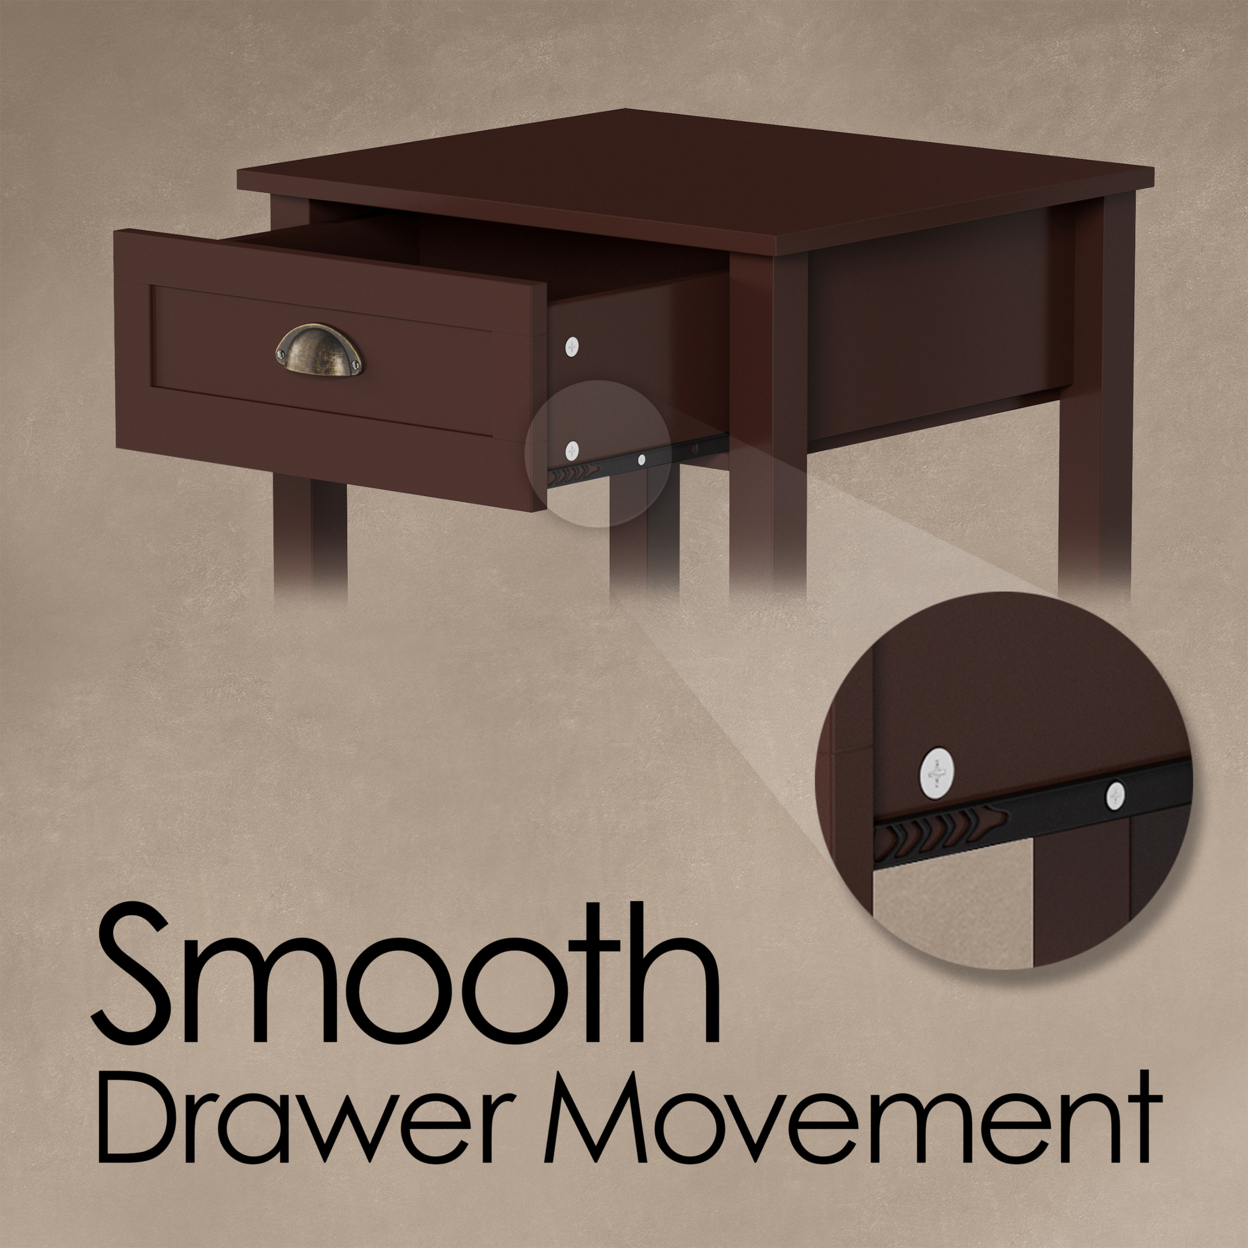 End Table With Drawer- Brown Sofa Side Table With Storage Shelf- Classic Shaker Style Wooden Nightstand